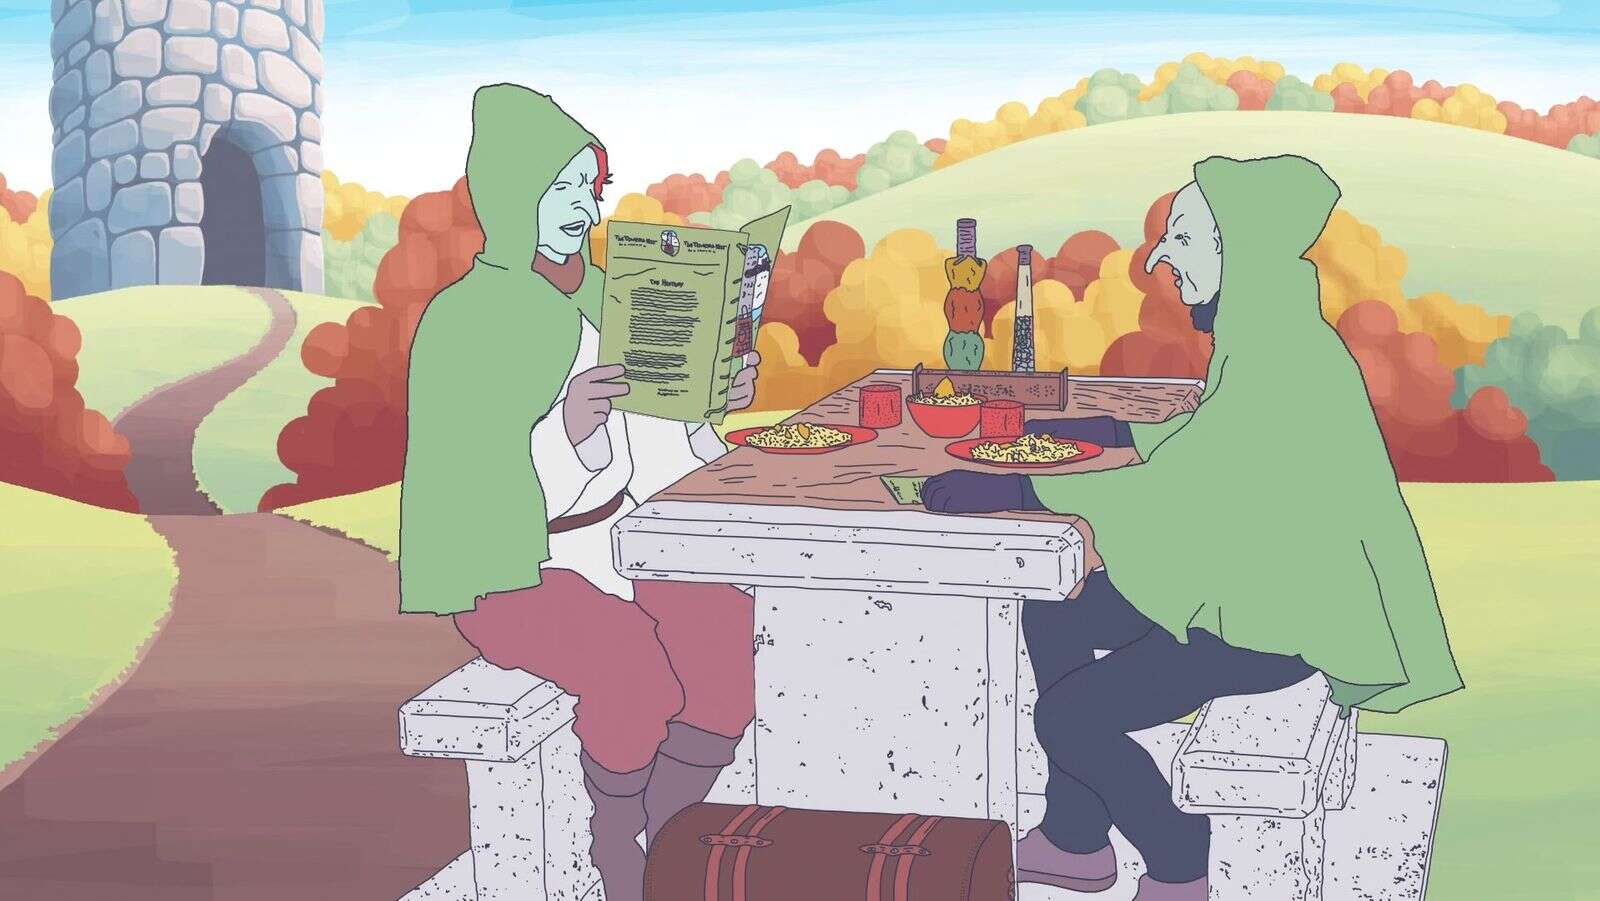 Troy DeWinne and Ethan Dirks on Creating Animated Goblin Music Video with Chef Giants | Slamdance 2021 [Exclusive Interview]